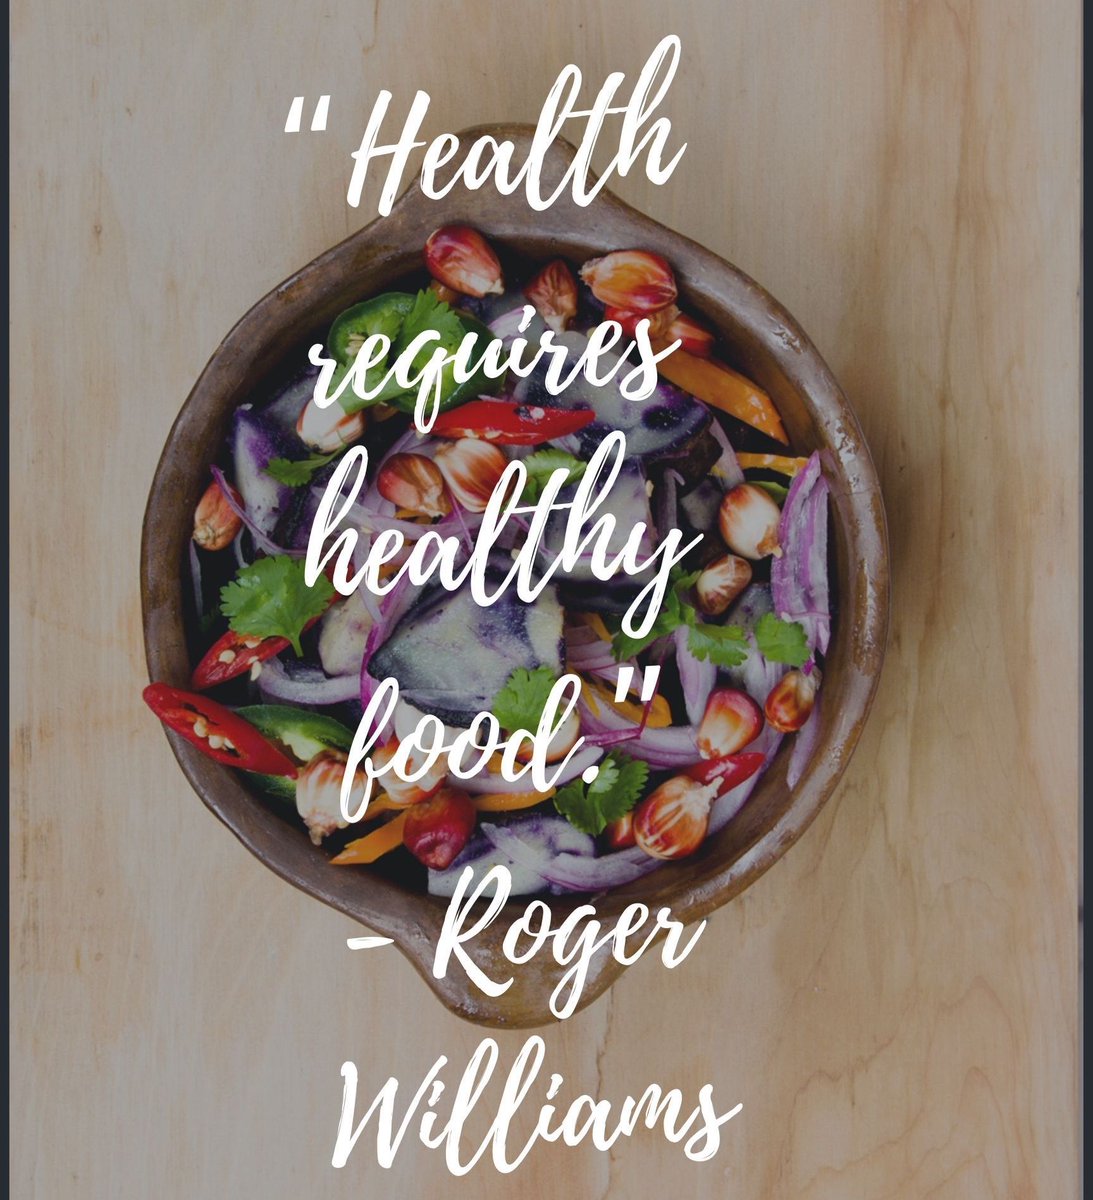 'Health requires healthy food.'  Simple and true! #NutritionatWork #WorkplaceWellness #HealthCoaching #NutritionCoaching